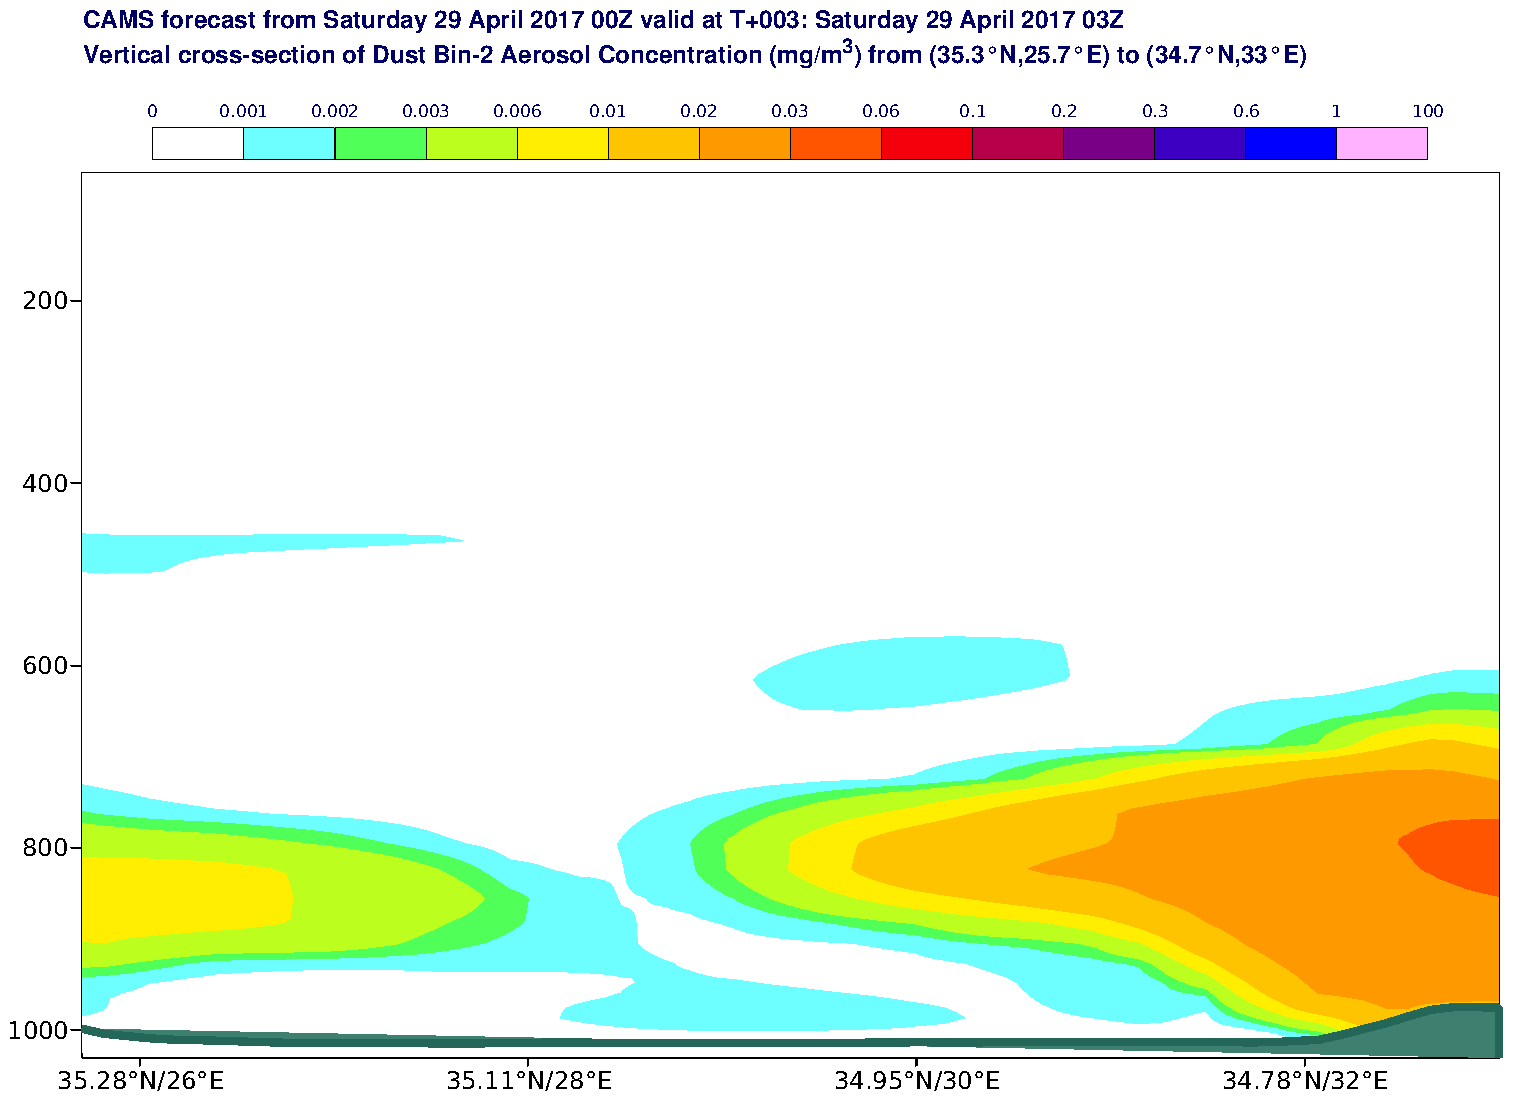 Vertical cross-section of Dust Bin-2 Aerosol Concentration (mg/m3) valid at T3 - 2017-04-29 03:00